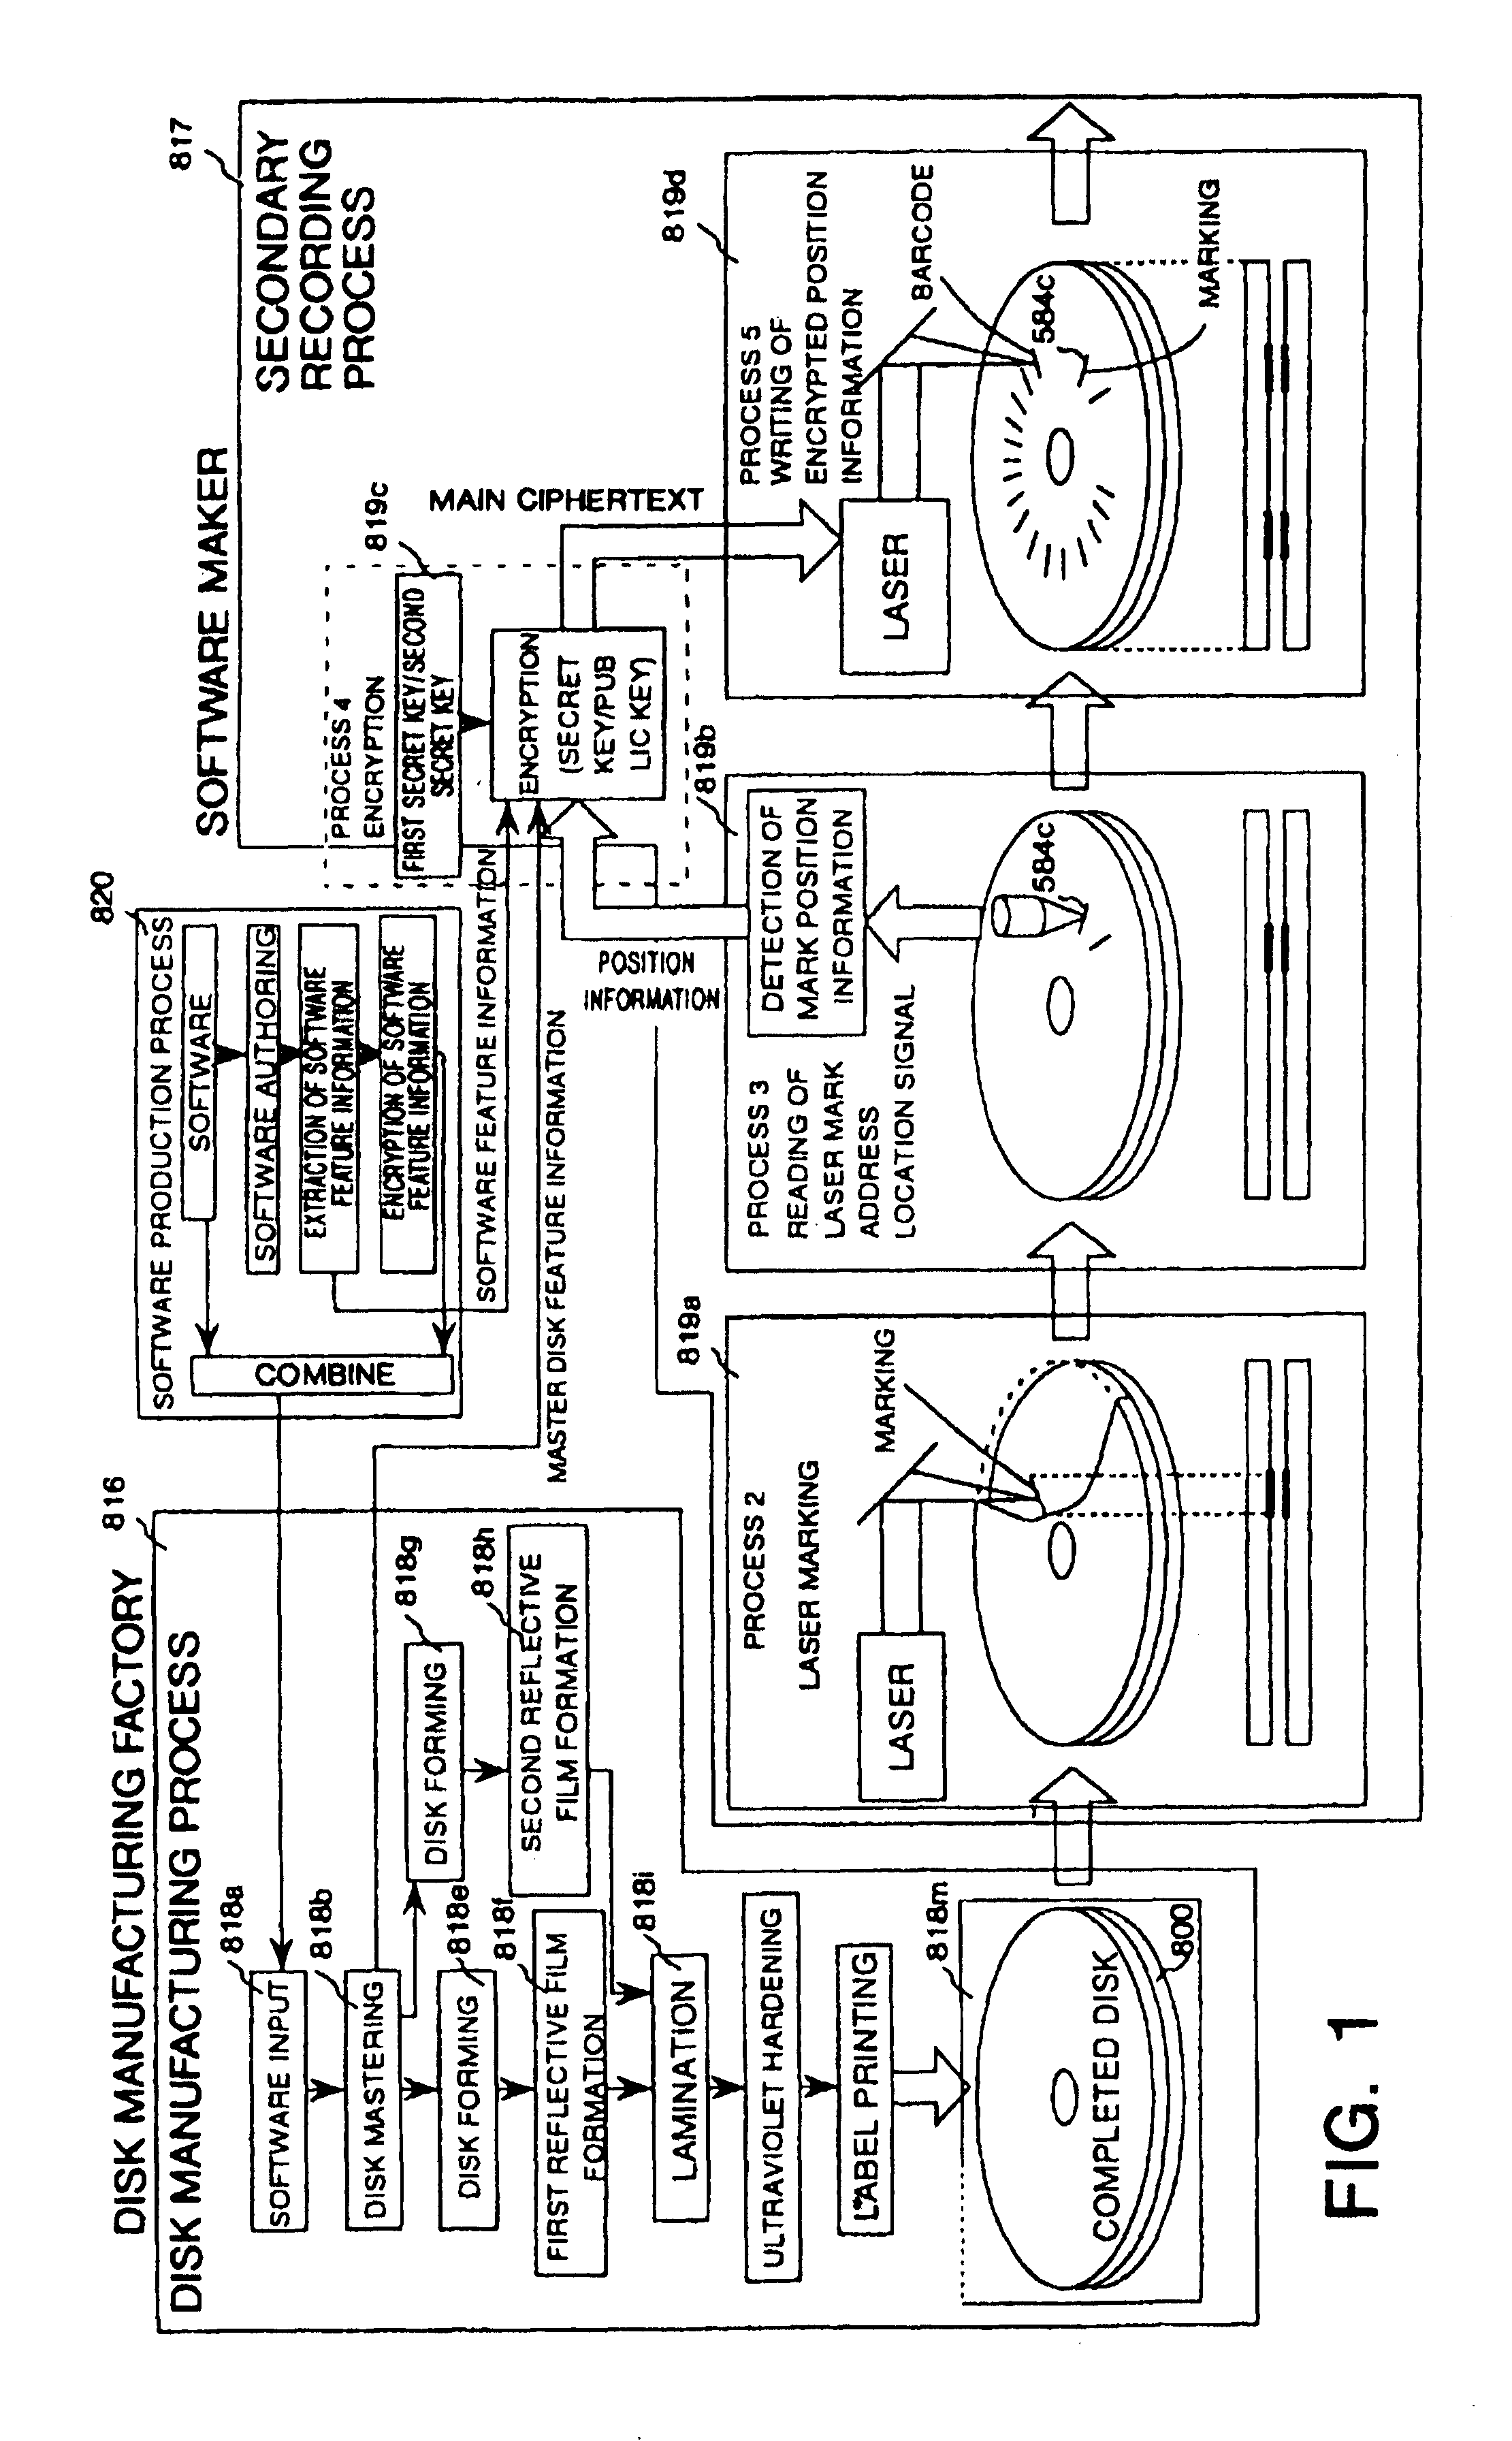 Mark forming apparatus, method of forming laser mark on optical disk, reproducing apparatus, optical disk and method of producing optical disk